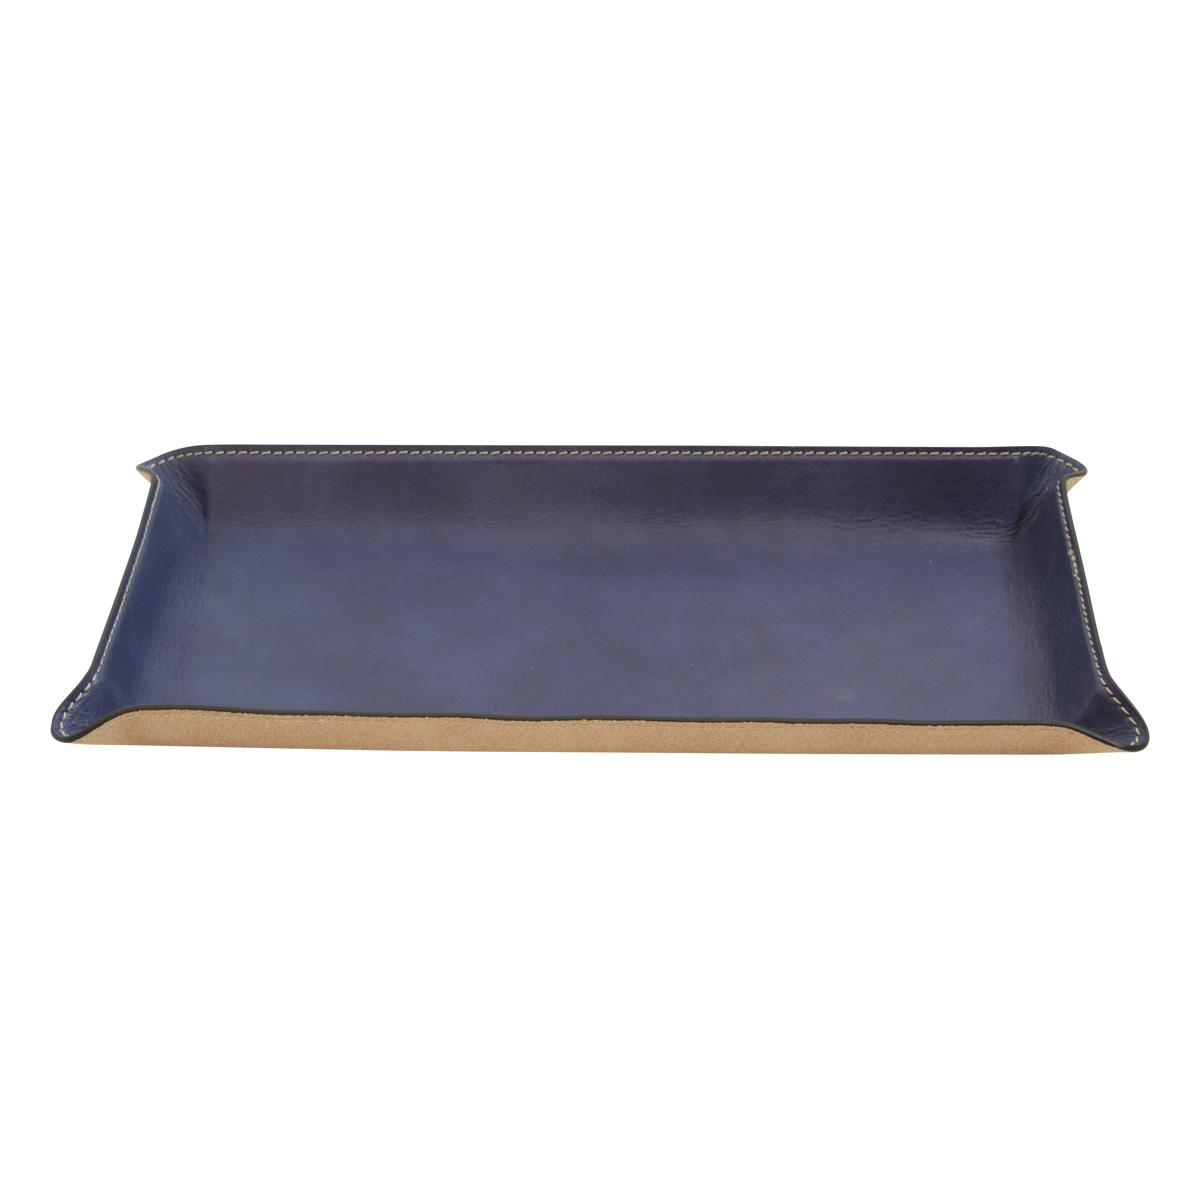 Leather desk tray |762089CB|Old Angler Firenze